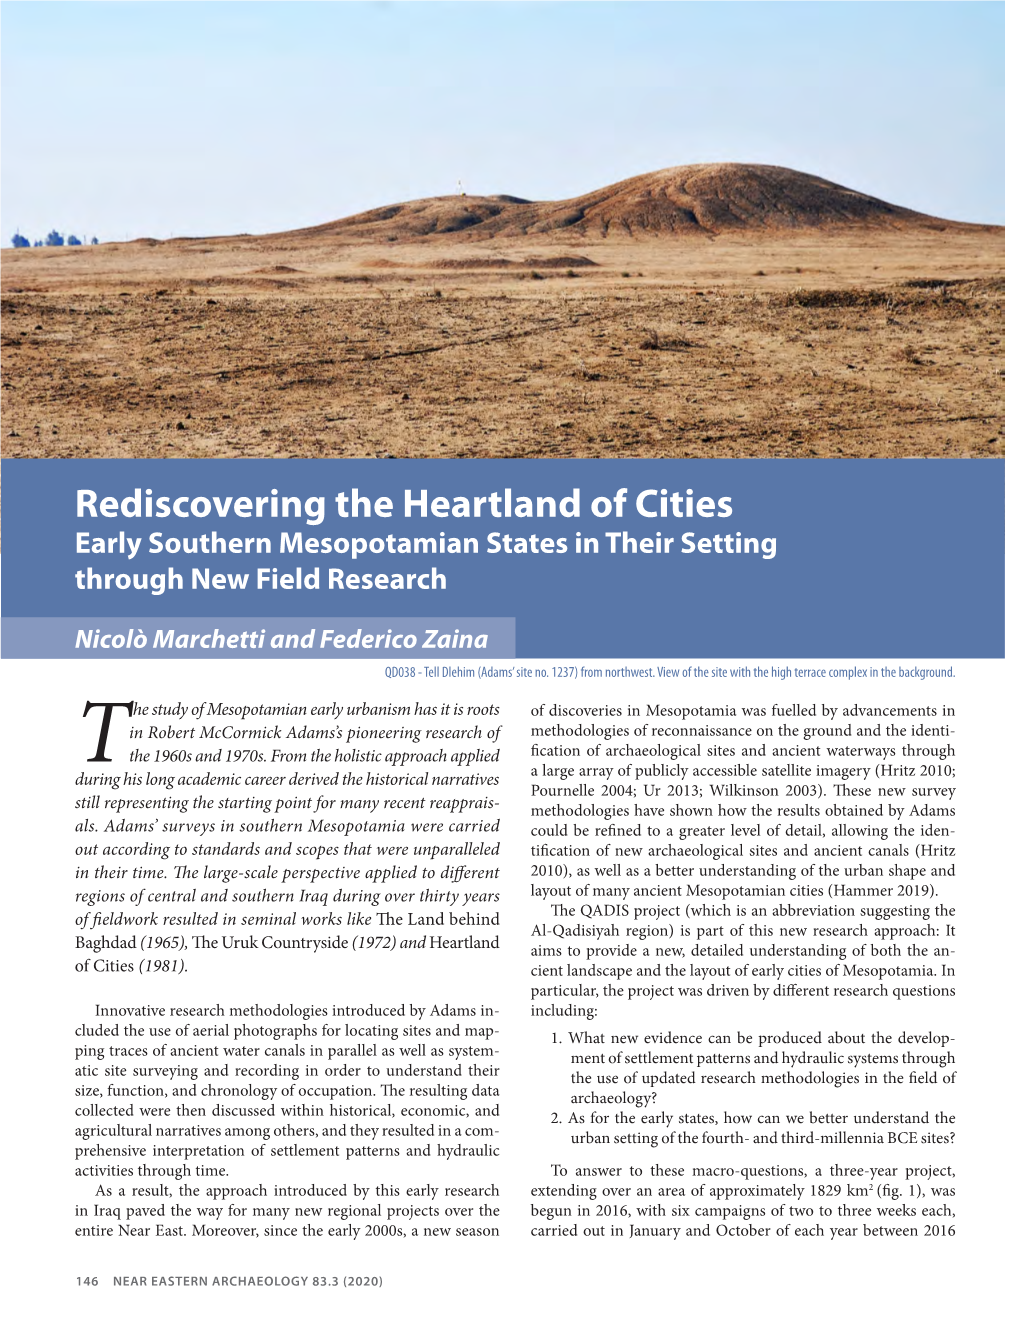 Rediscovering the Heartland of Cities Early Southern Mesopotamian States in Their Setting Through New Field Research